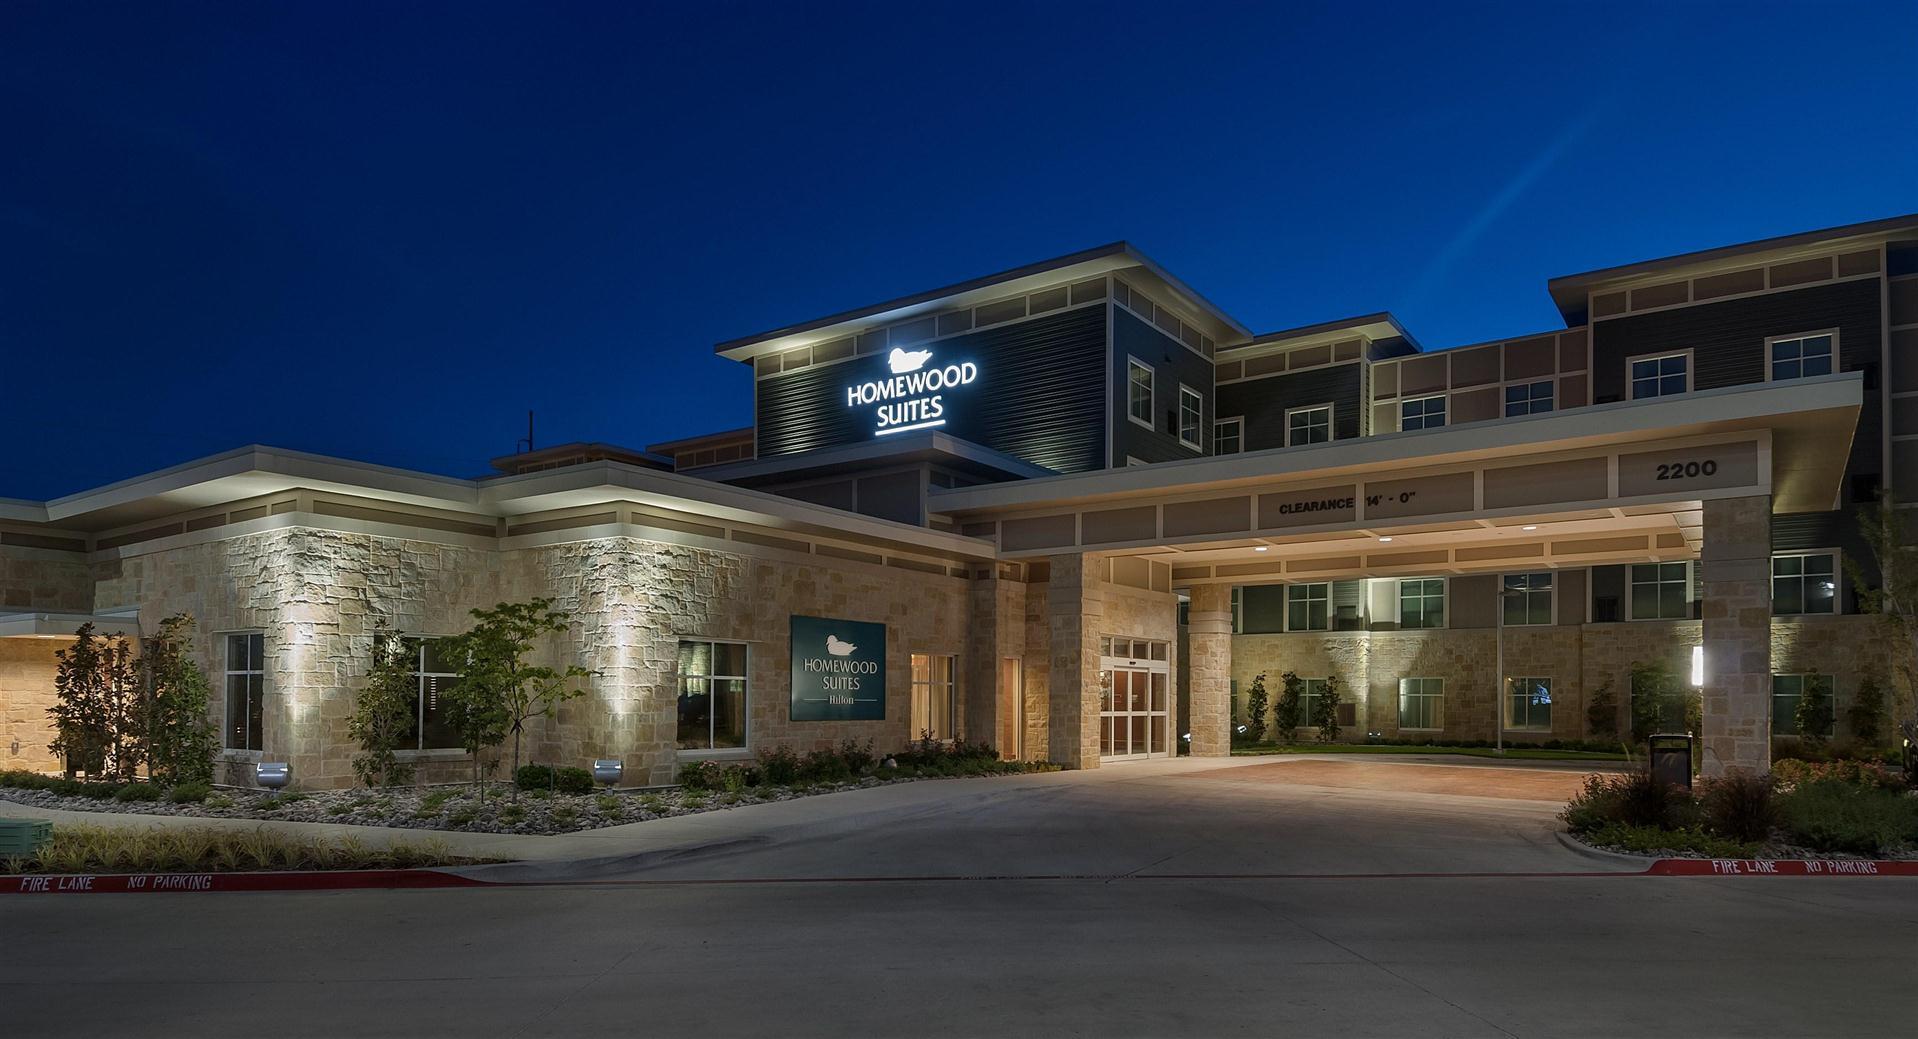 Homewood Suites by HiltonÂ® Fort Worth - Medical Center, TX in Fort Worth, TX